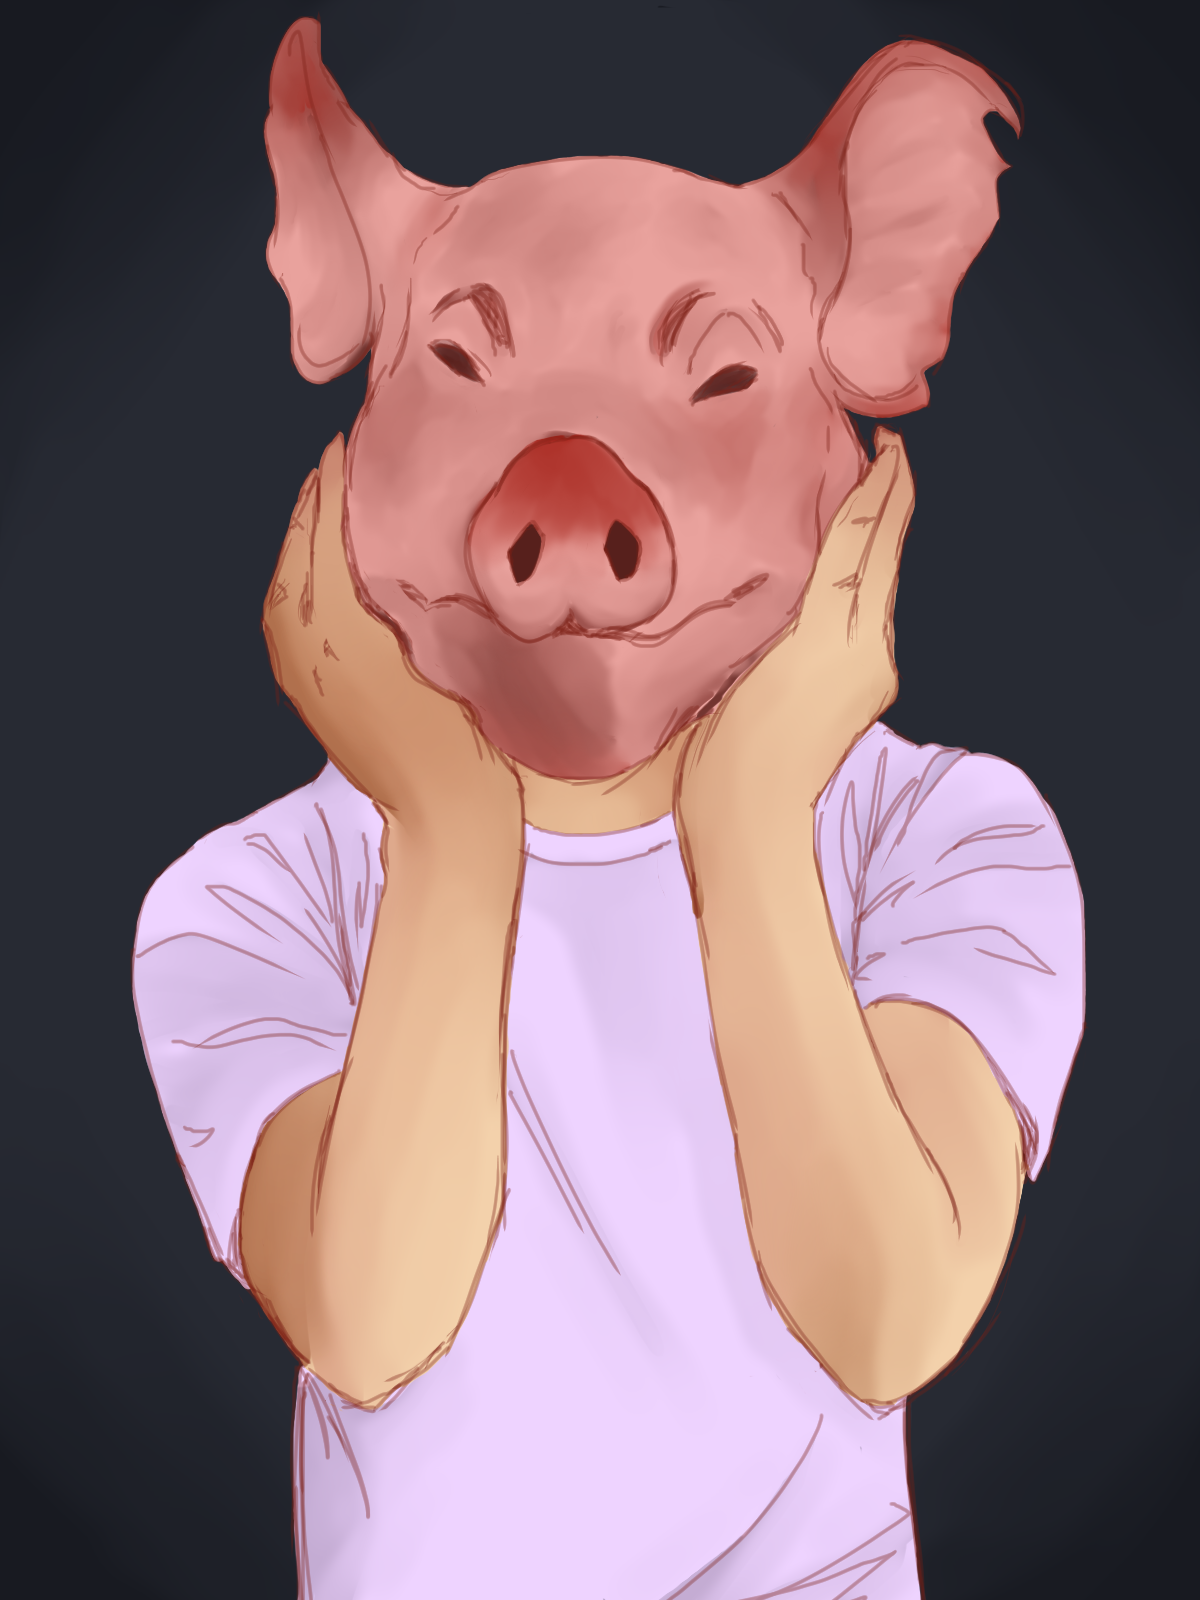 a young boy holding a pig's head in front of his face